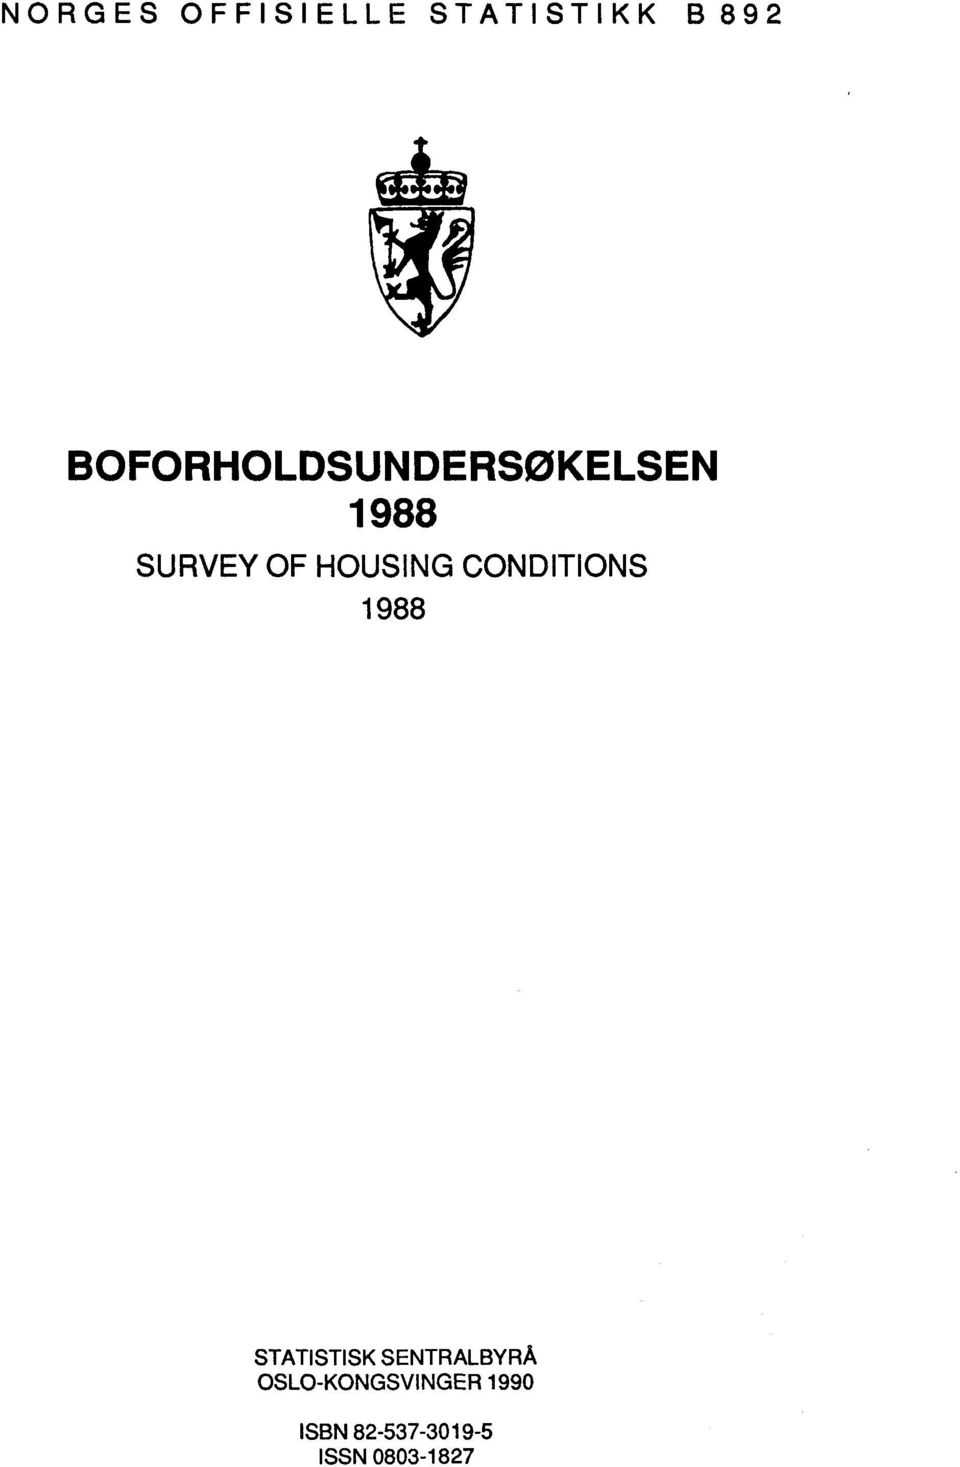 HOUSING CONDITIONS 1988 STATISTISK